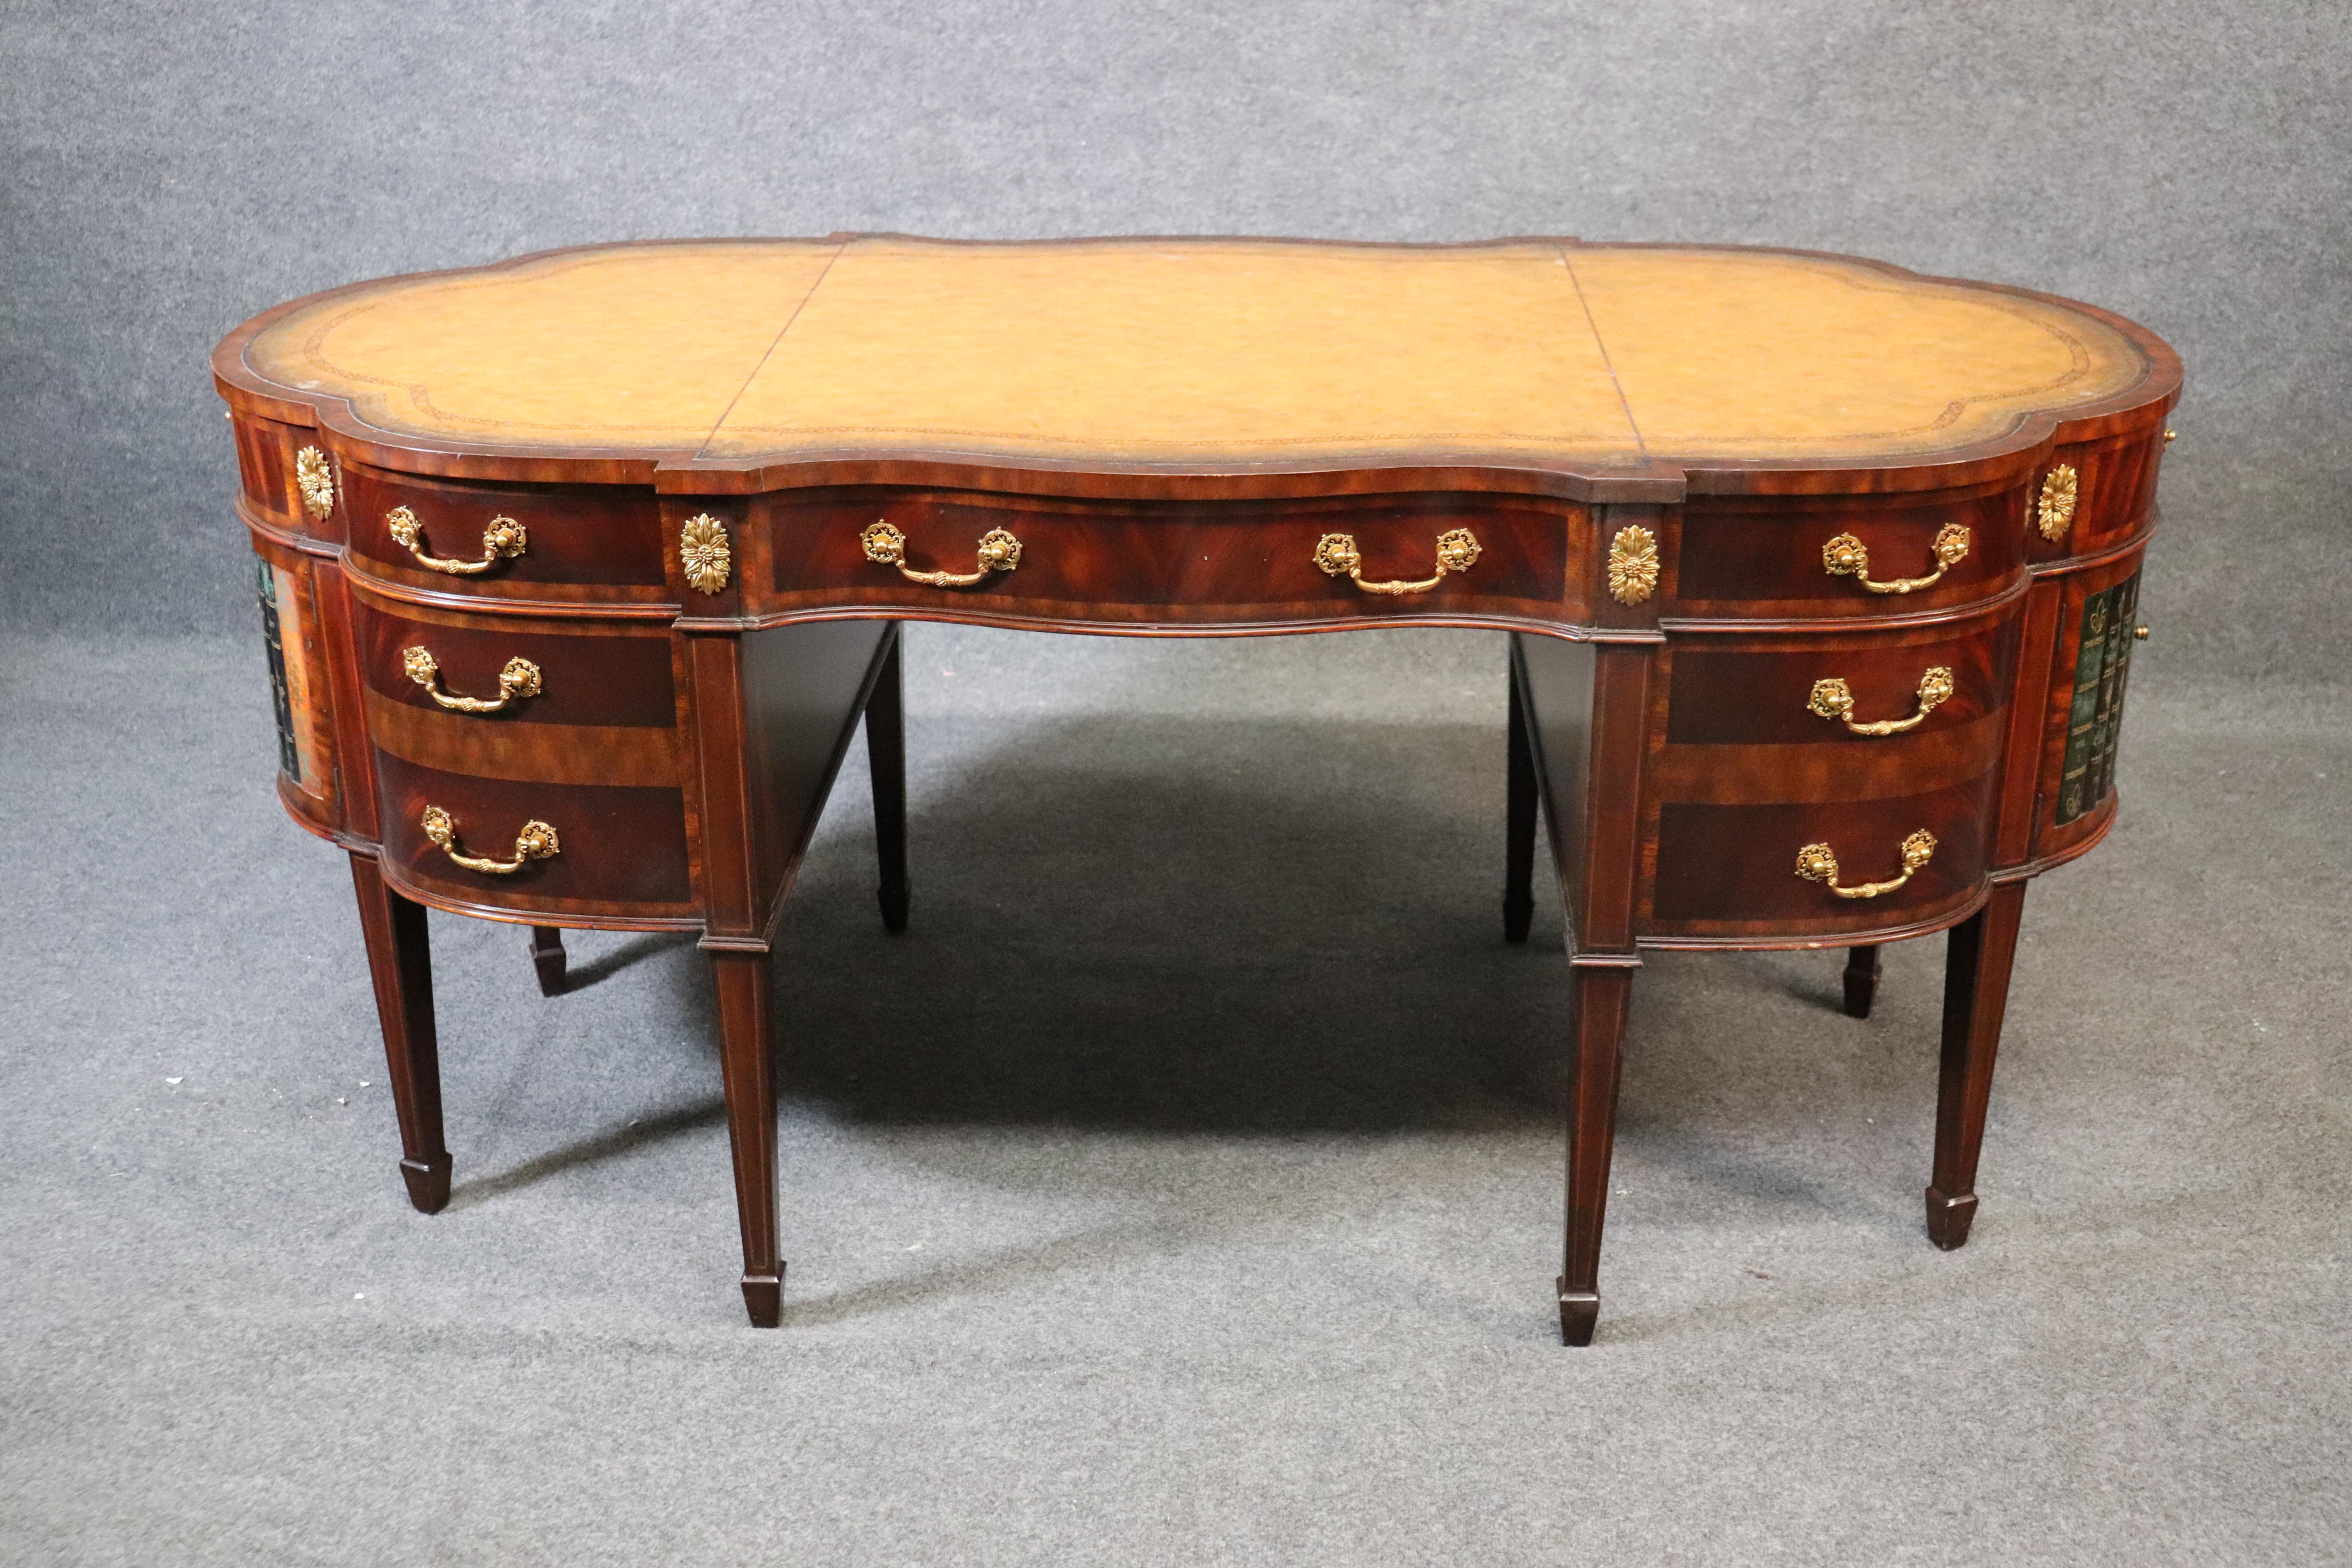 This beautiful Maitland Smith desk features a gorgeous yellow ochre leather top and faux books at each end that conceal an area for actual books or anything else you want to put there. The desk is from the 1990s and is in good vintage condition. The